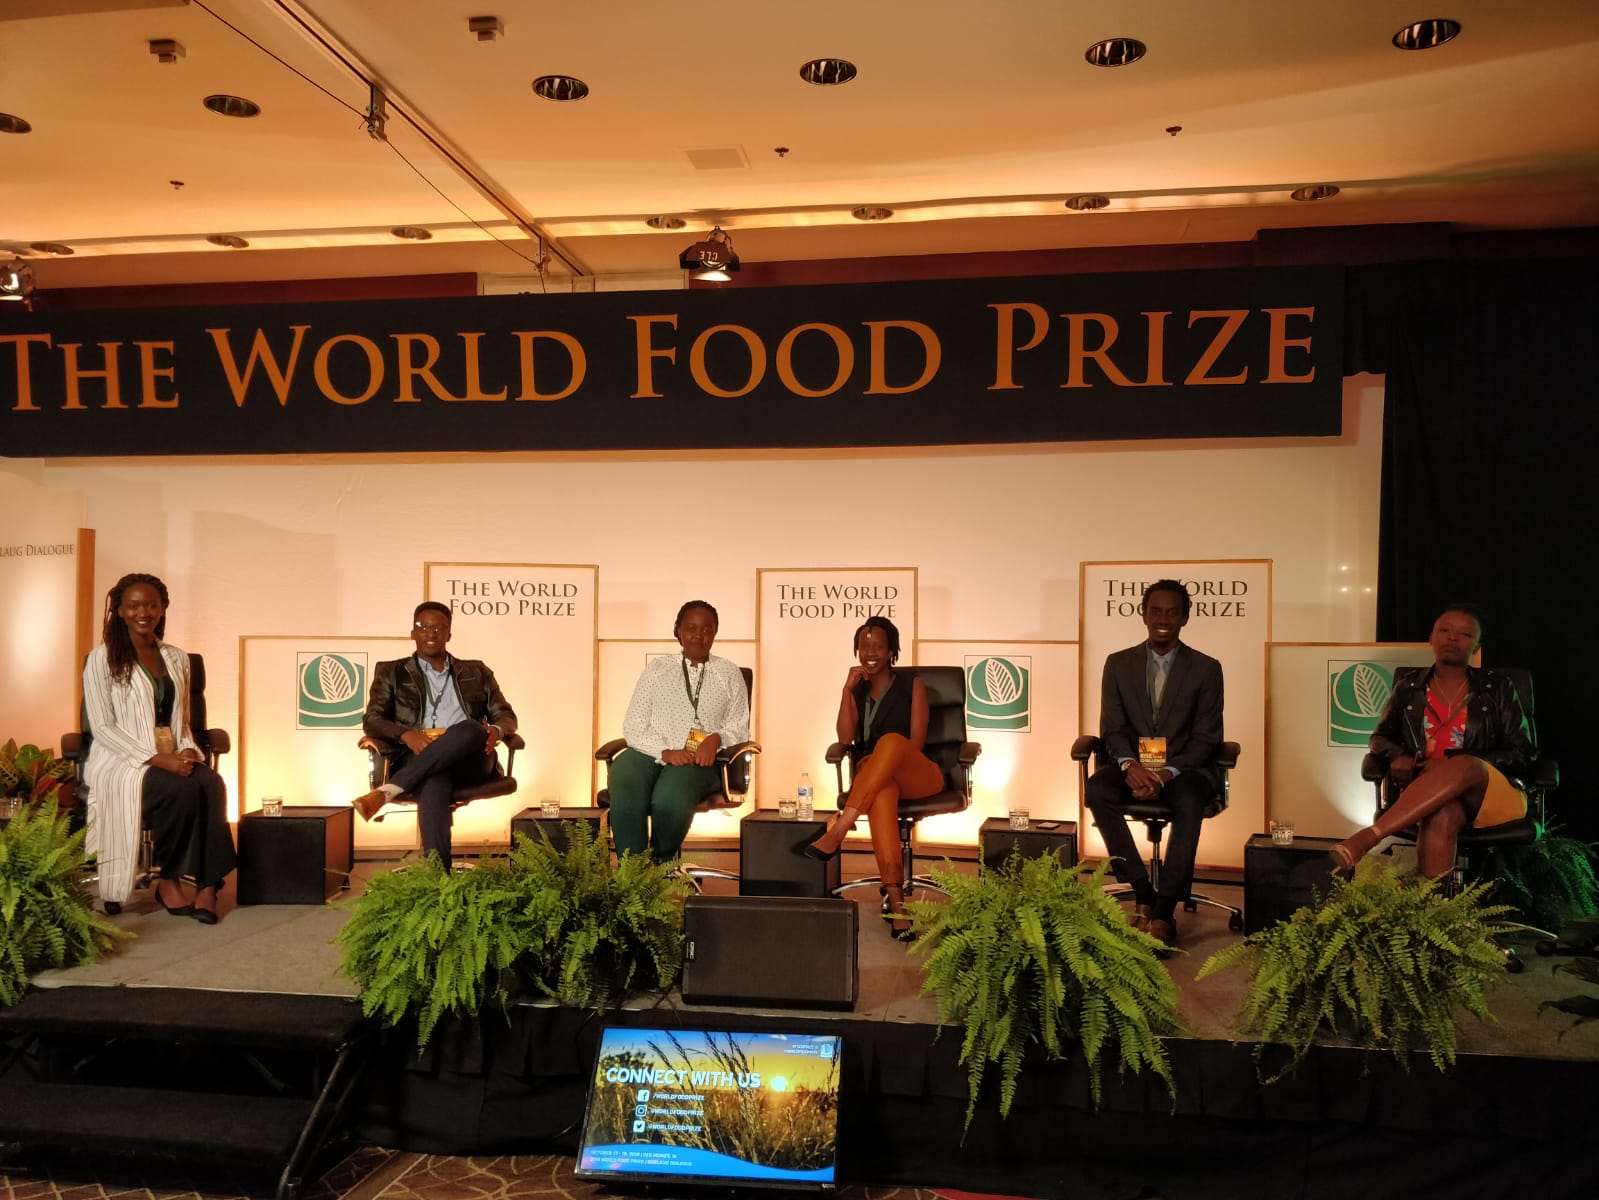 Nebraska students and visiting scholars were invited to attend the World Food Prize in Iowa, called by some the premier conference in the world on global agriculture. 